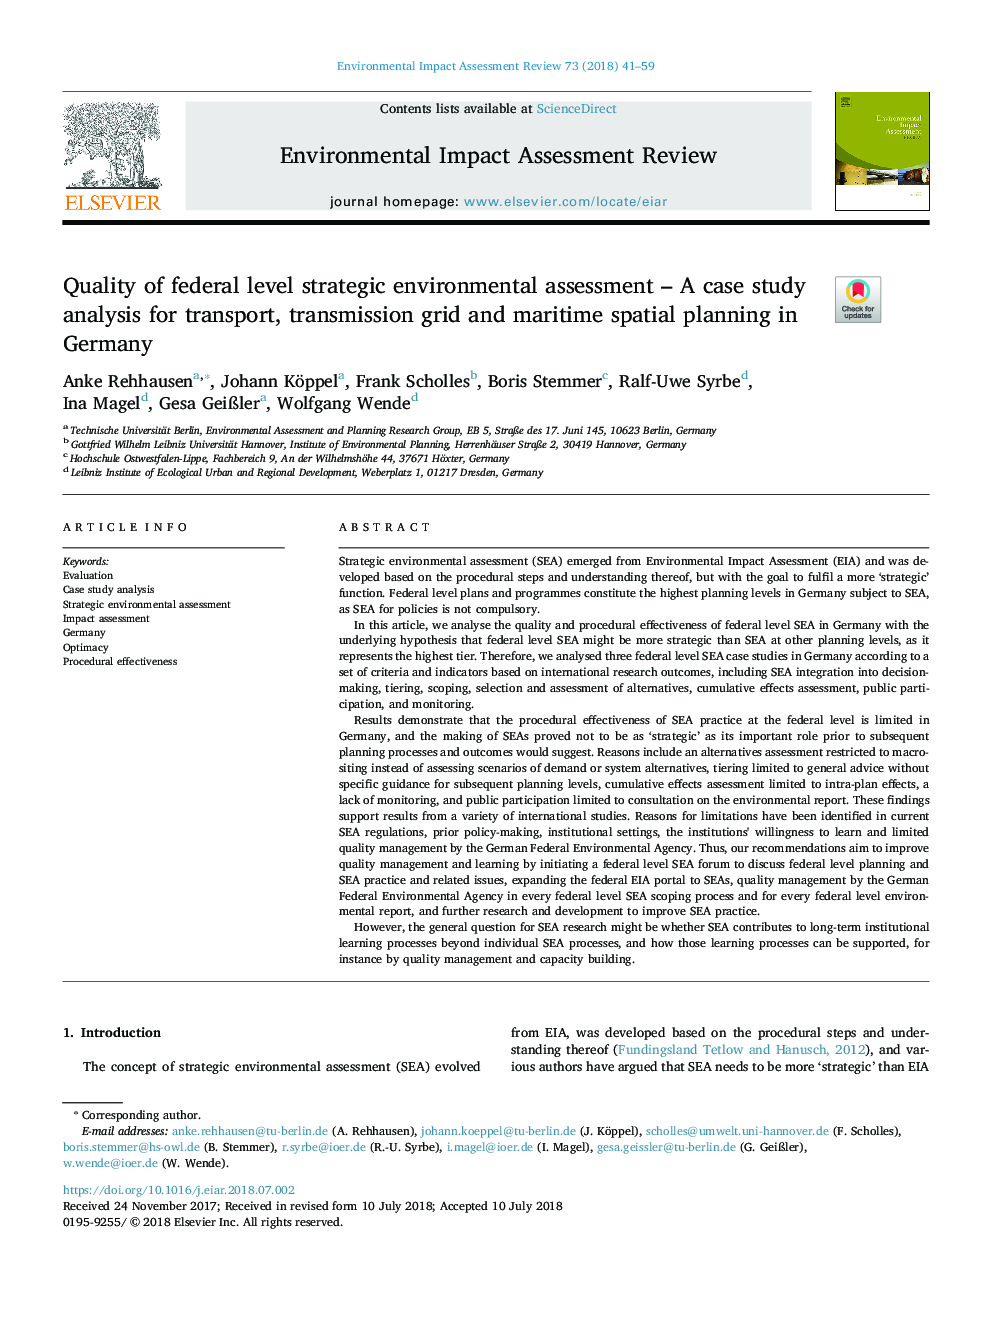 Quality of federal level strategic environmental assessment - A case study analysis for transport, transmission grid and maritime spatial planning in Germany